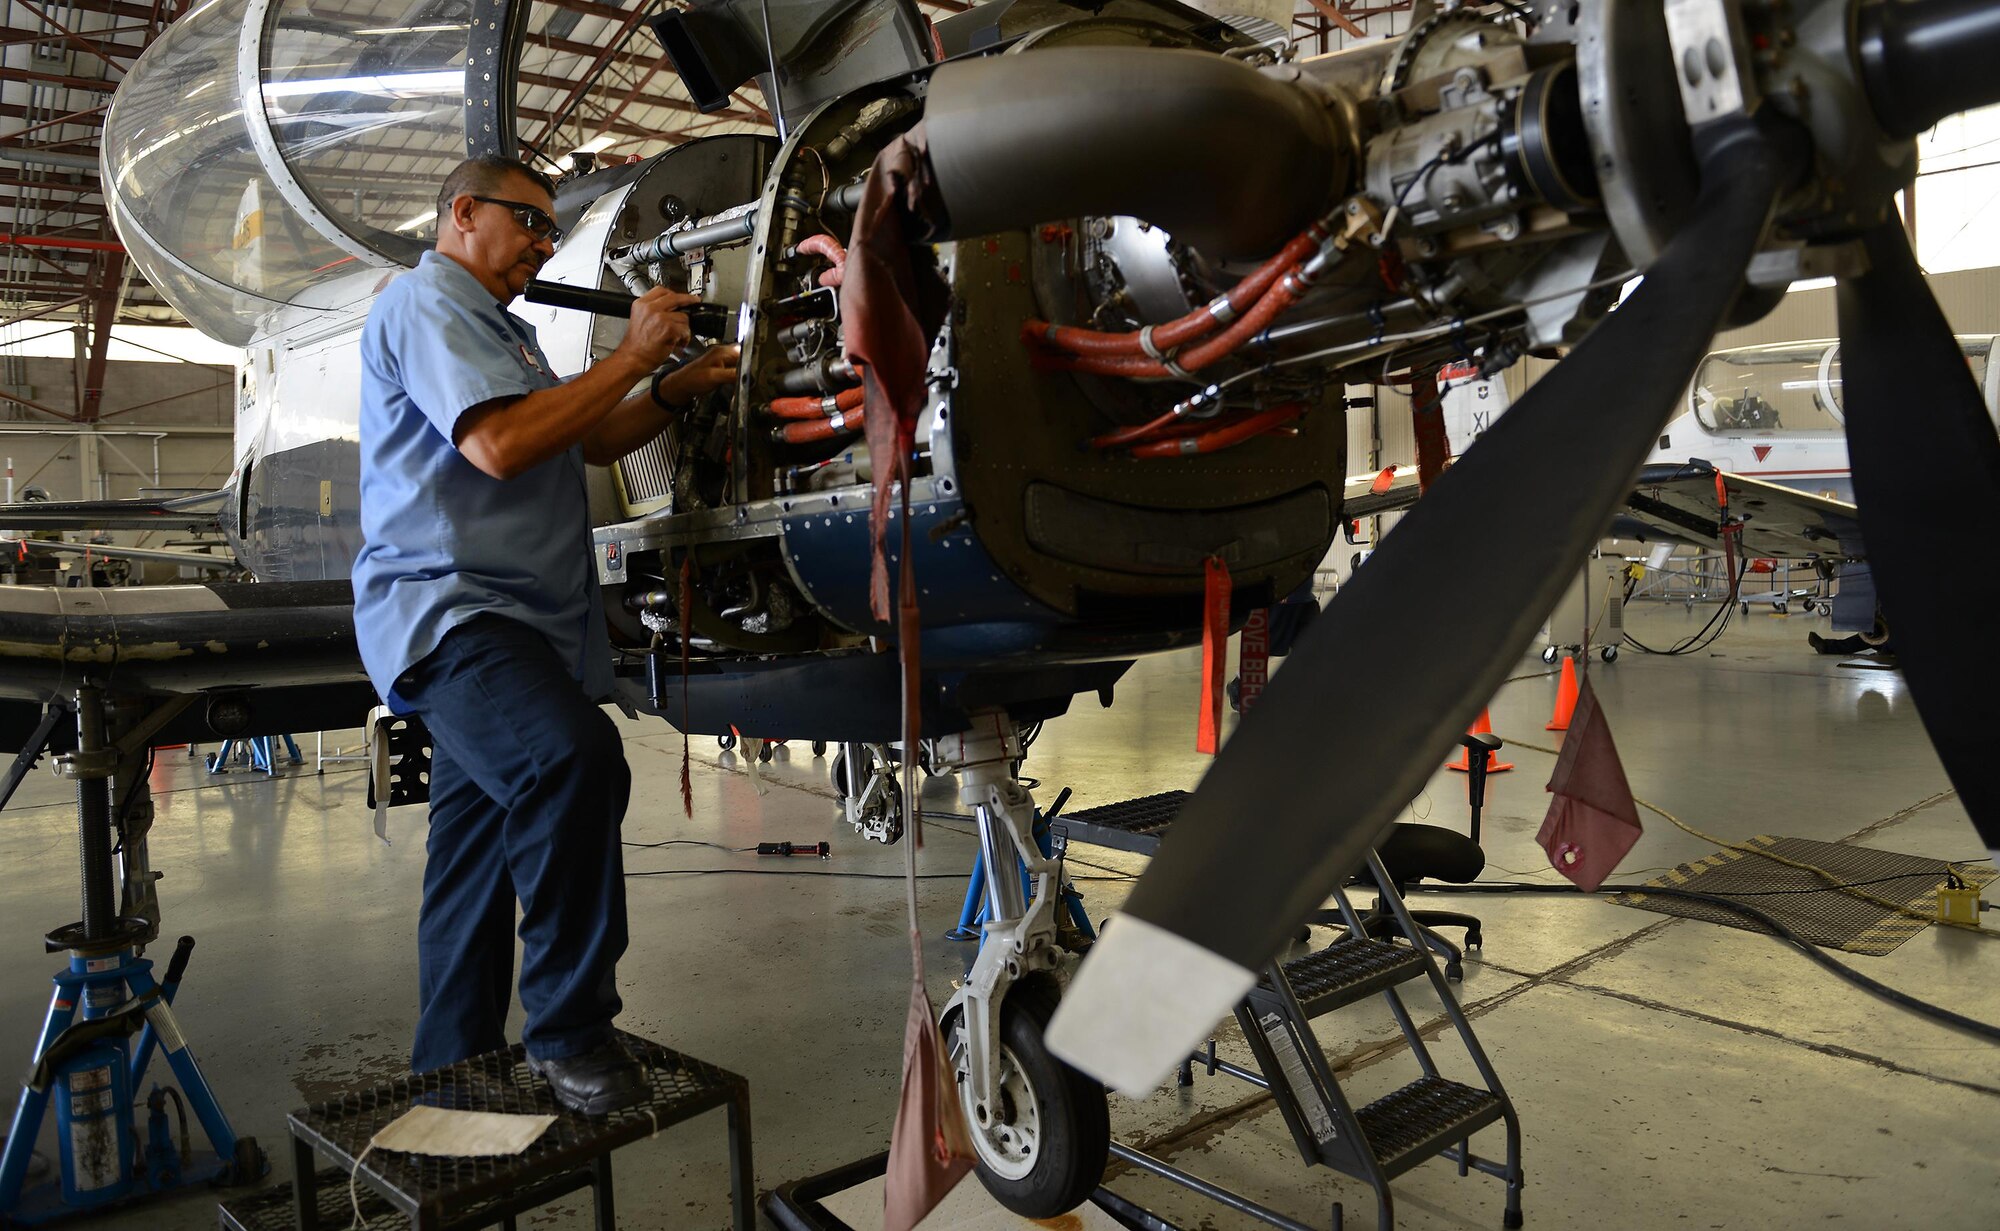 Raul Castaneda, 47th Maintenance Directorate maintainer, inspects the engine bay of a T-6 Texas II on Laughlin Air Force Base, Texas, April 12, 2017. Castaneda is part of the maintenance crew that restored Laughlin’s hangar queens, putting Laughlin at the top of Air Education and Training Command with the least amount of T-6 hangar queens. A “hangar queen” is an aircraft that hasn’t been flown in more than 30 days. (U.S. Air Force photo/Airman 1st Class Benjamin N. Valmoja)